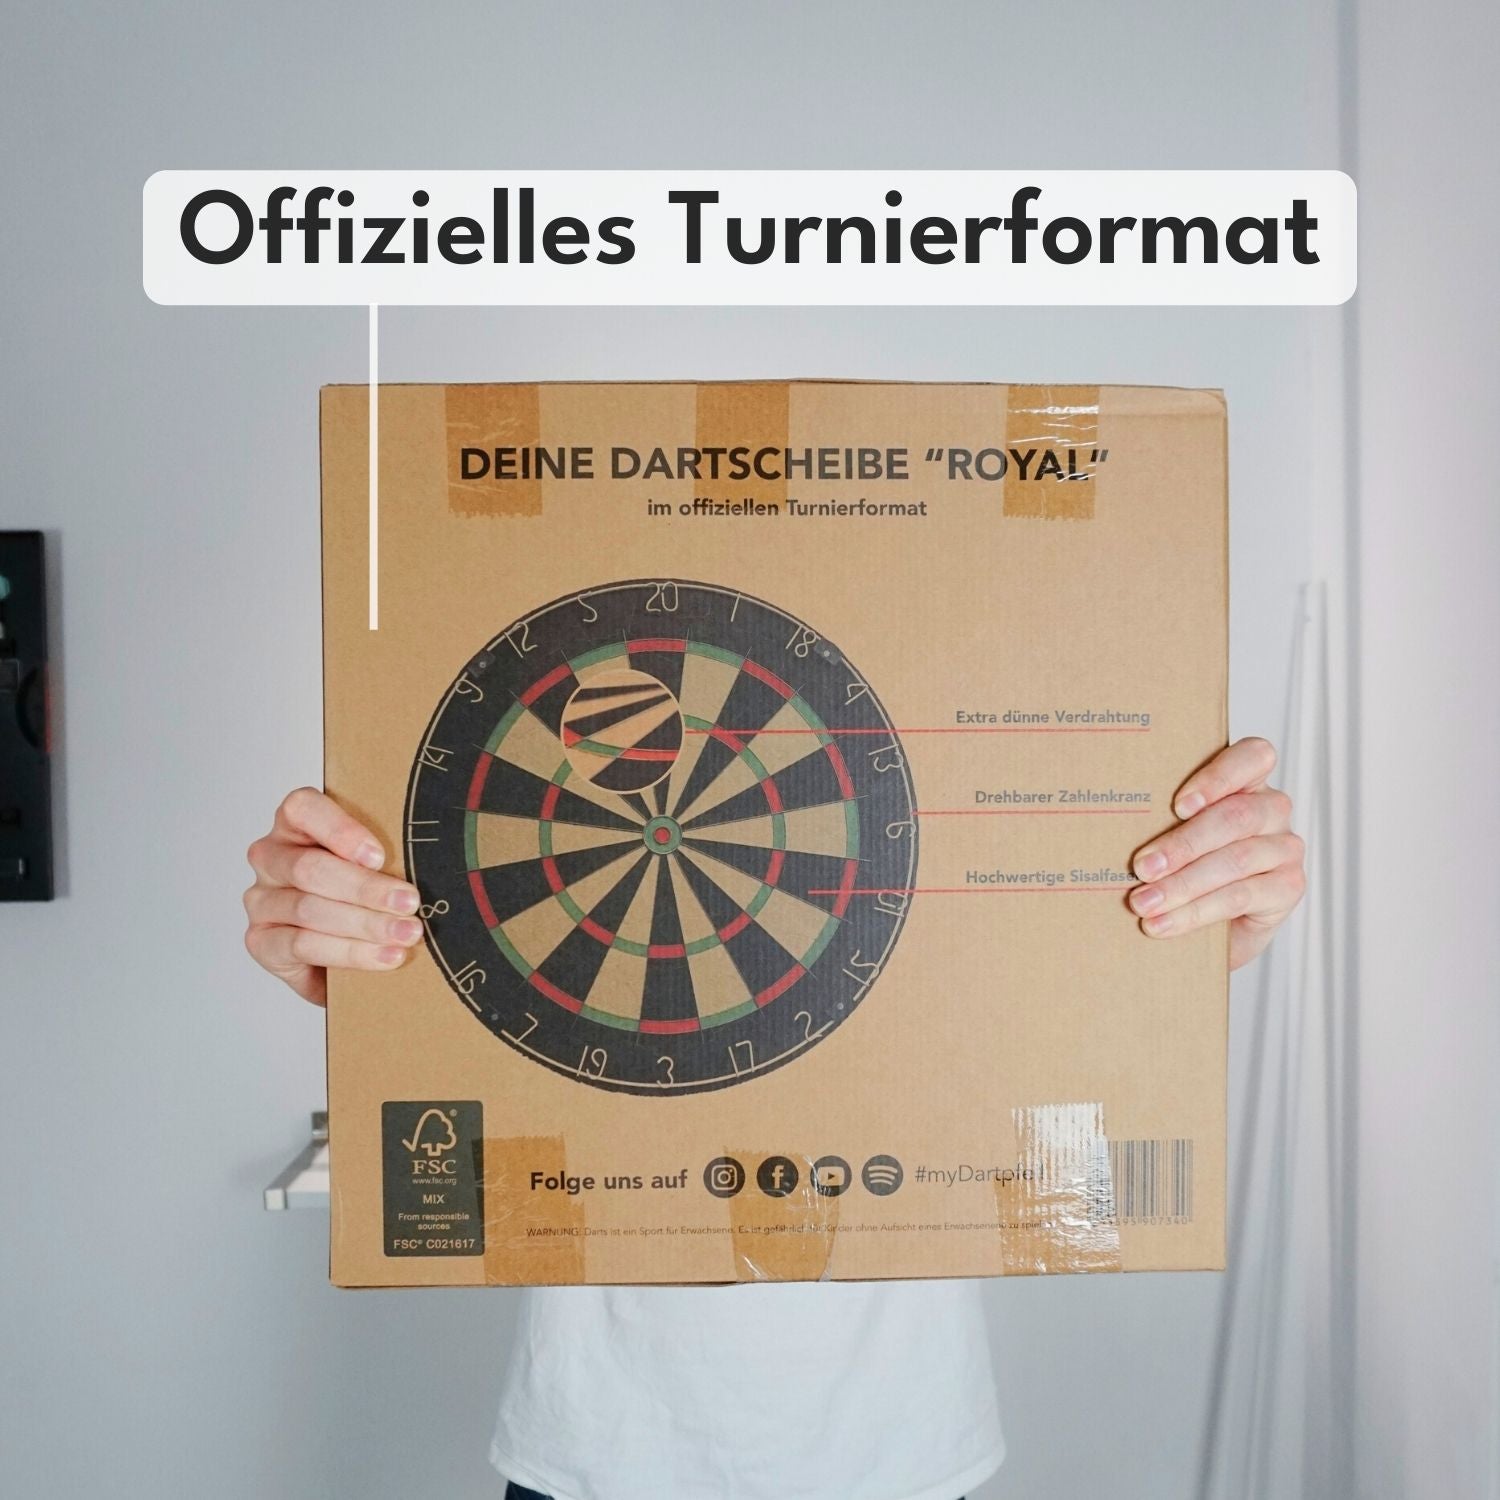 Design your own personalized dartboard with text